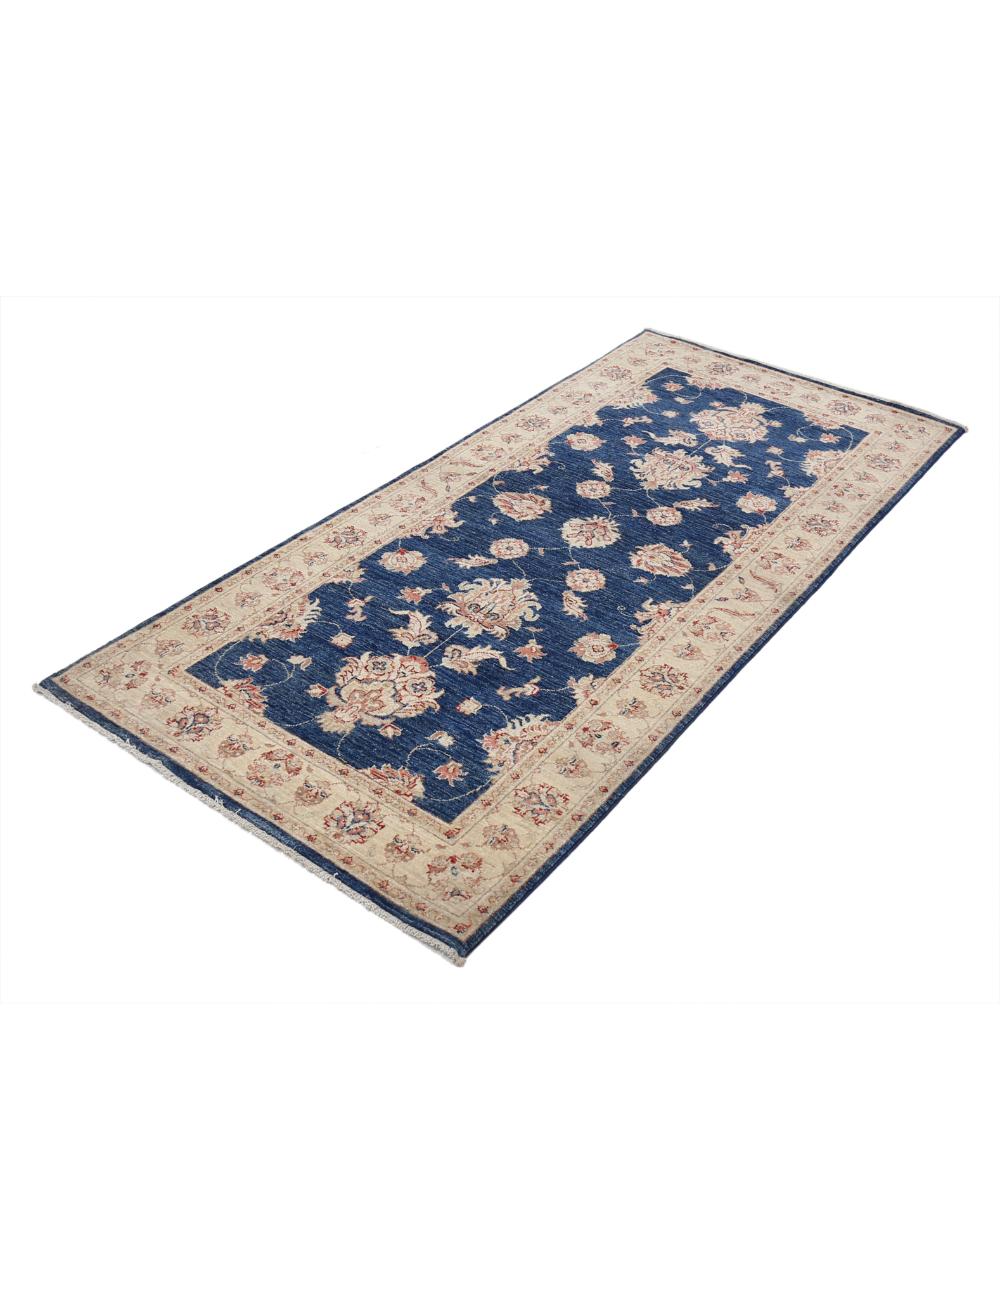 Ziegler 3' 2" X 6' 11" Hand-Knotted Wool Rug 3' 2" X 6' 11" (97 X 211) / Blue / Ivory